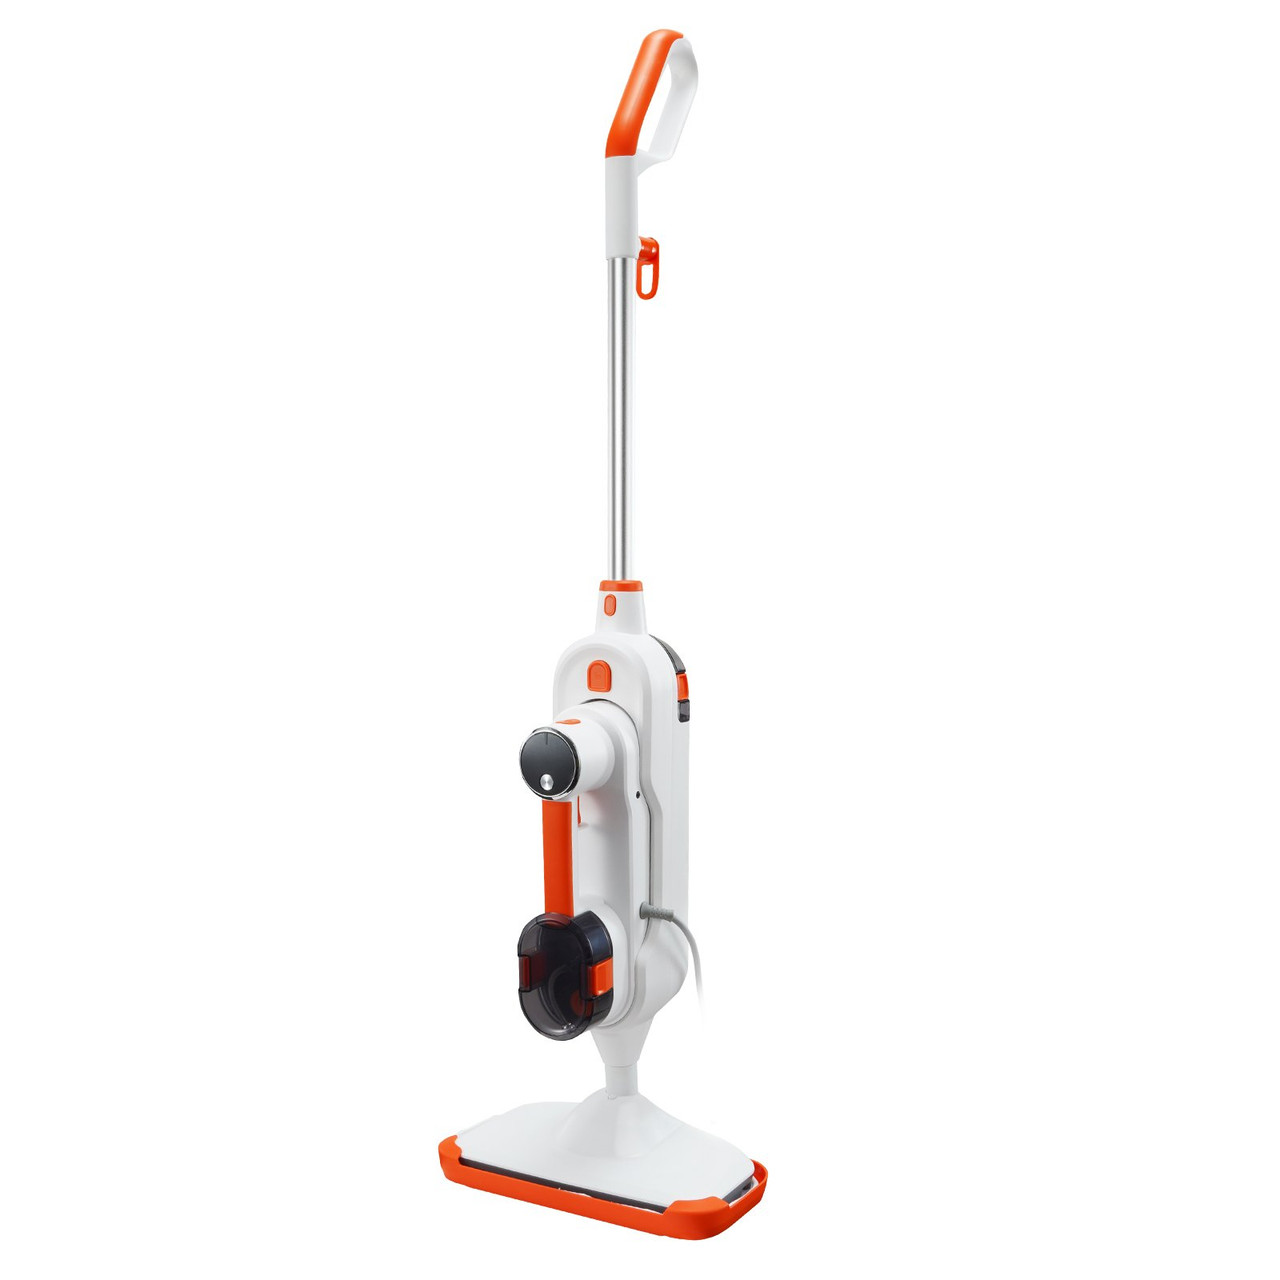 Steam Mop, 8-in-1 Hard Wood Floor Cleaner with 7 Replaceable Brush Heads, for Various Hard Floors, Like Ceramic, Granite, Marble, Linoleum, Natural Floor Mop with 2 pcs Machine Washable Pads